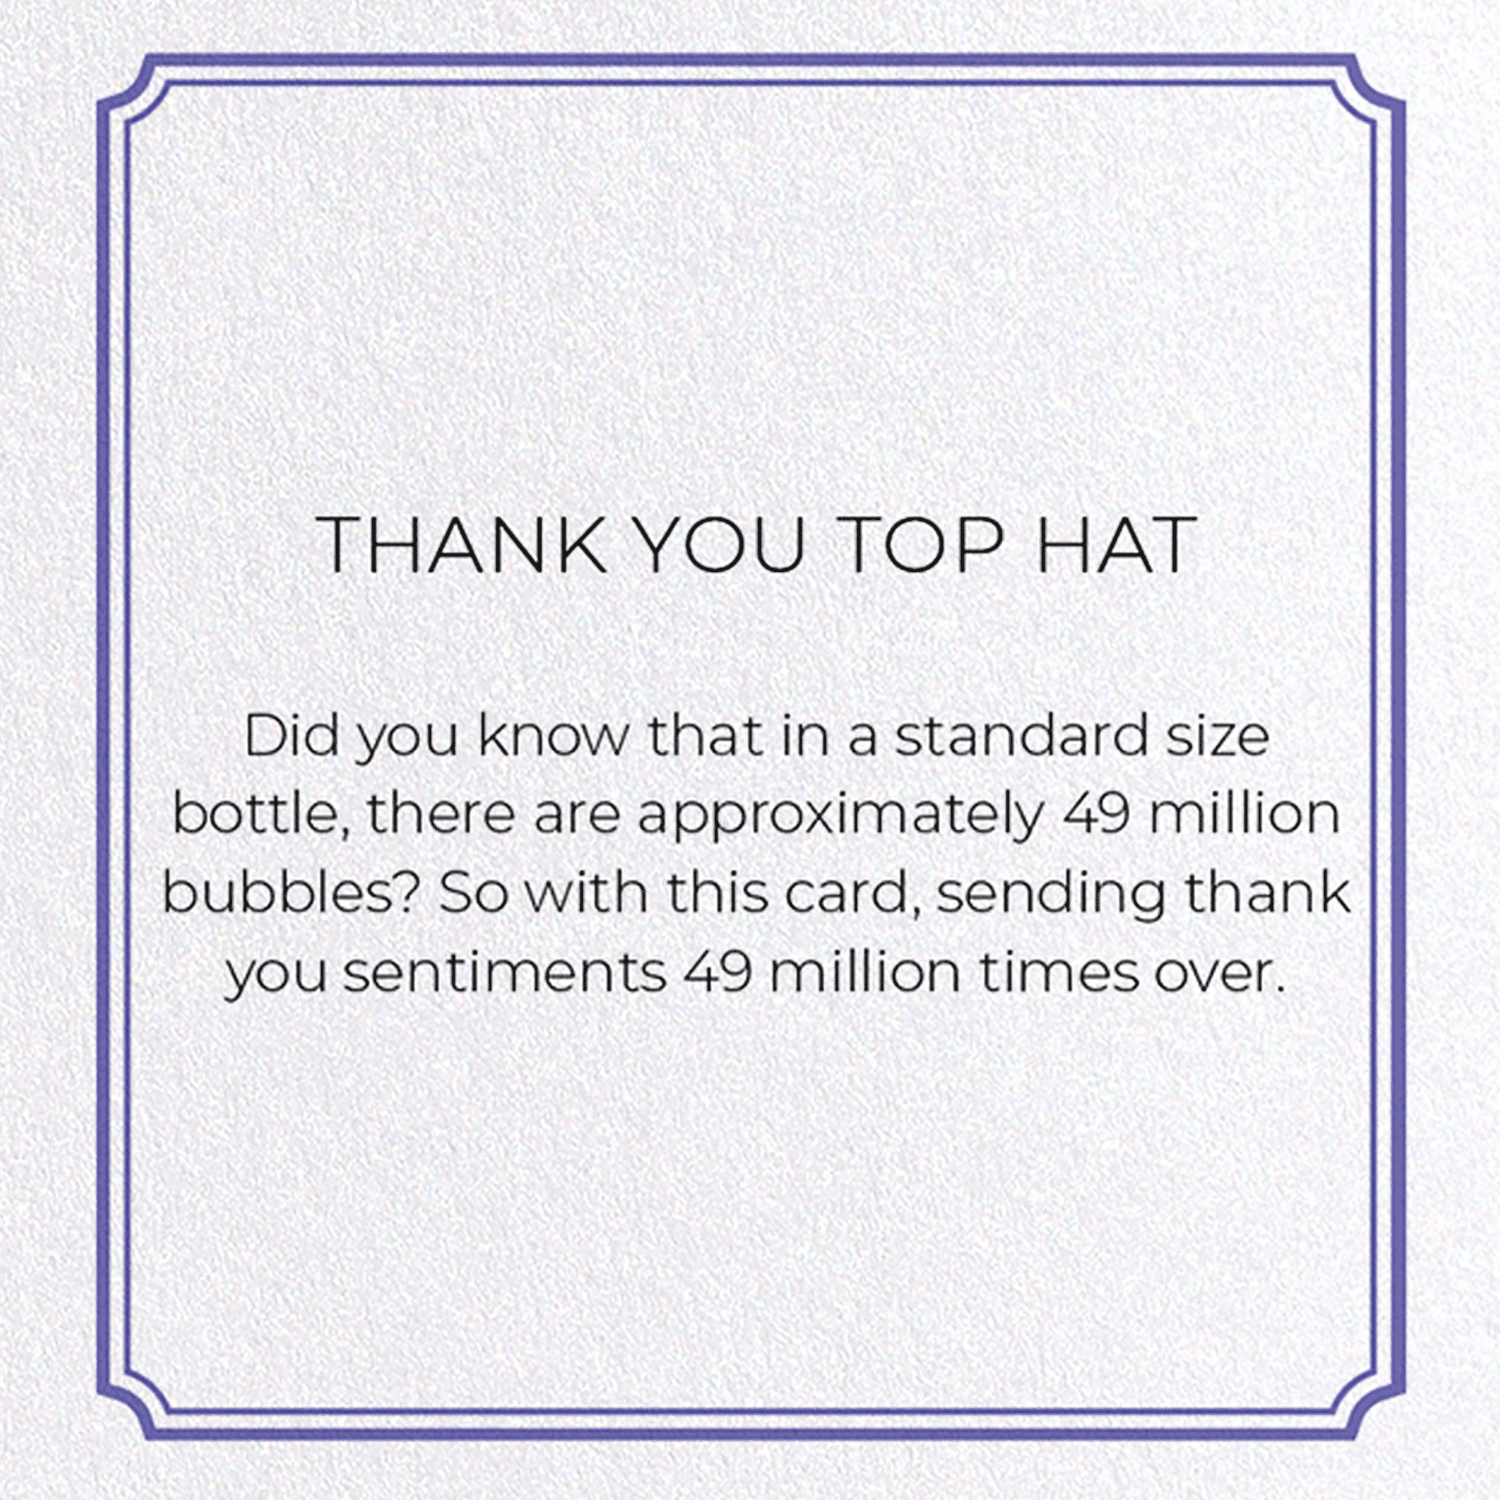 THANK YOU TOP HAT: Vintage Greeting Card